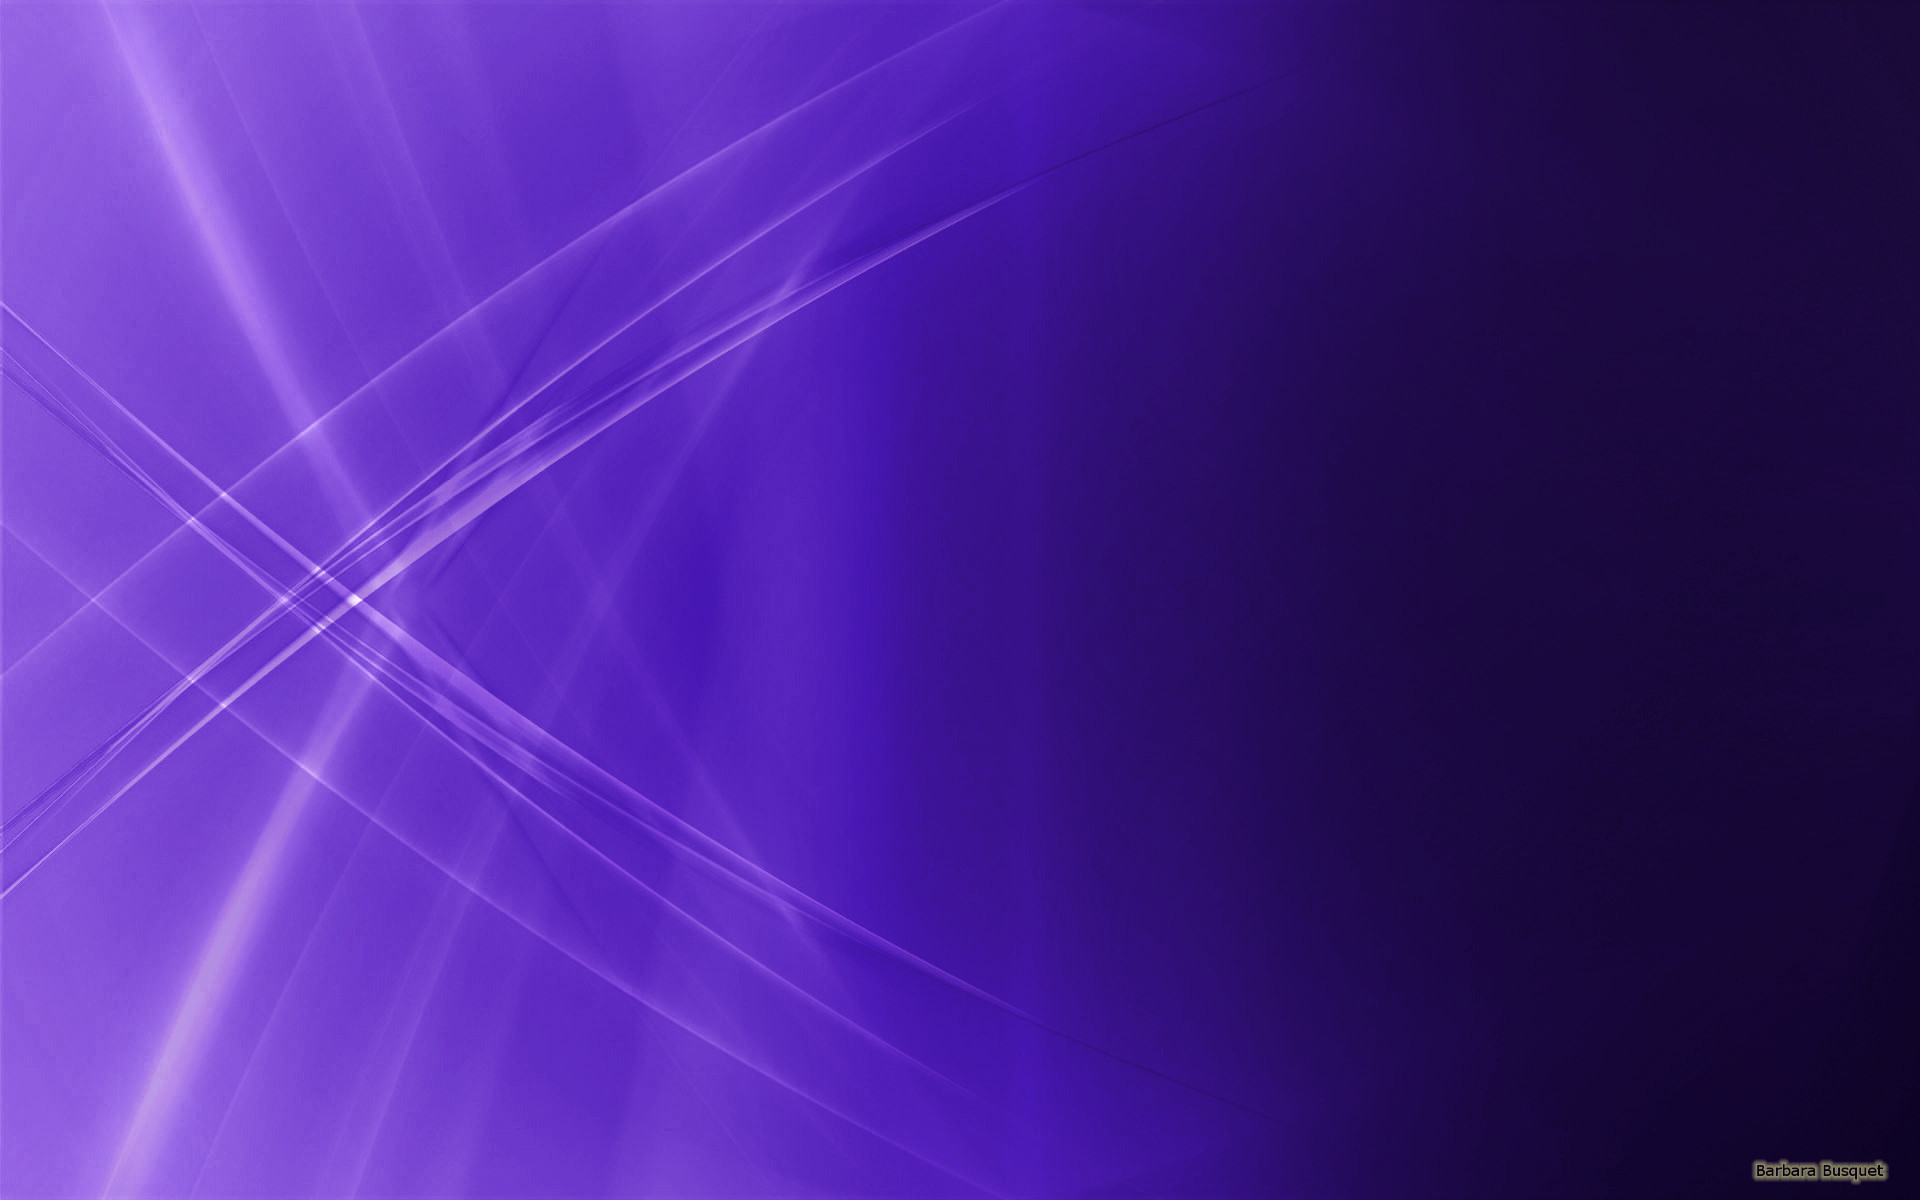 1920x1200 Purple blue abstract wallpaper with curves